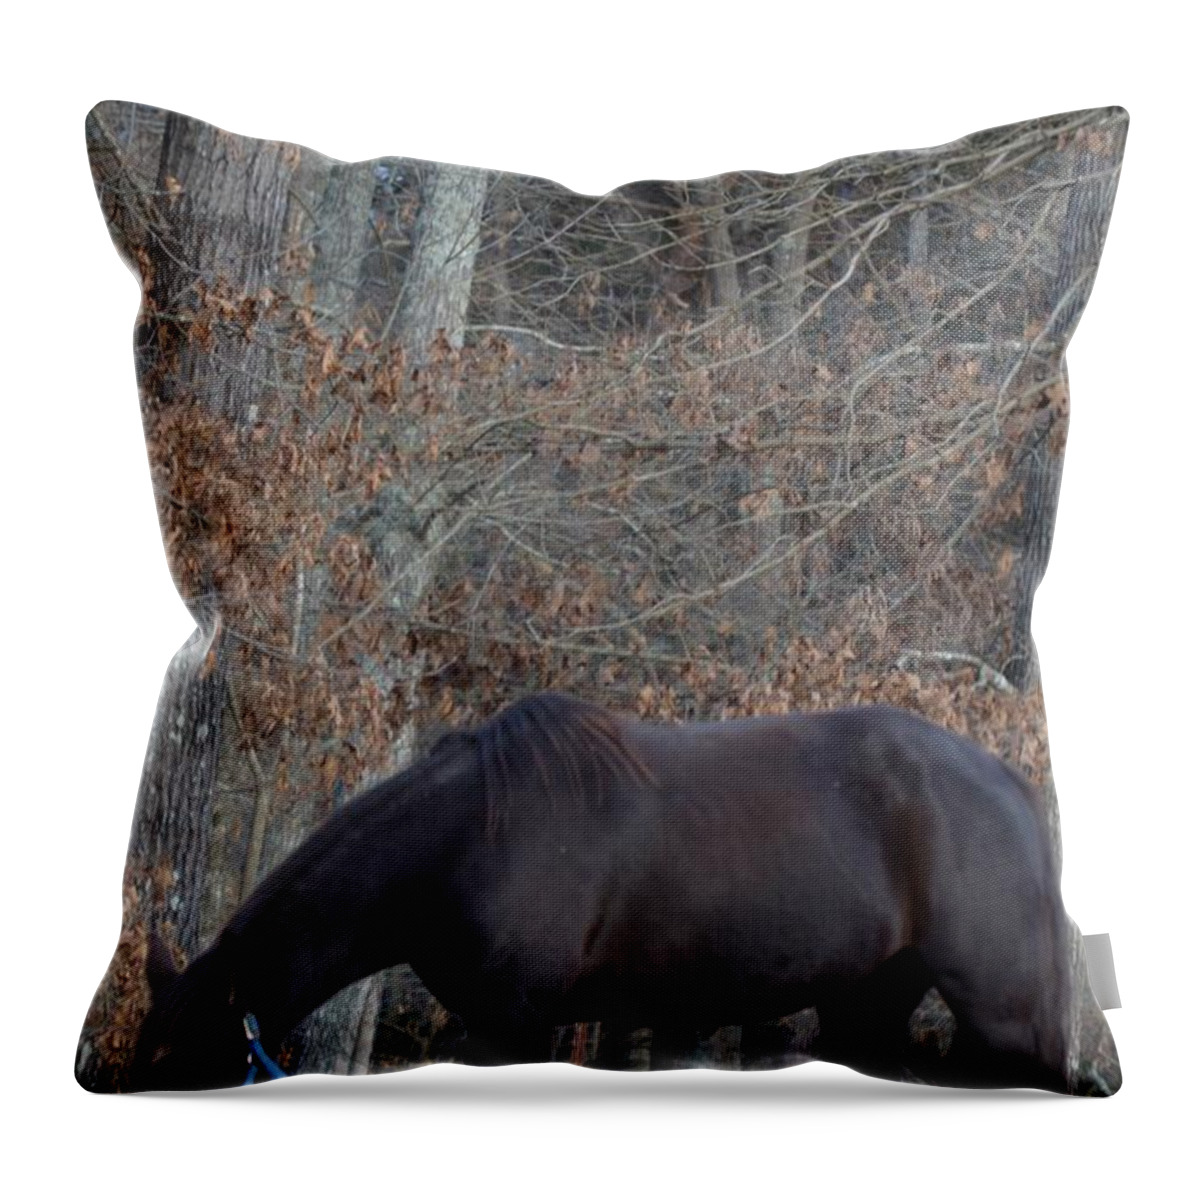 Black Throw Pillow featuring the photograph The Black by Maria Urso